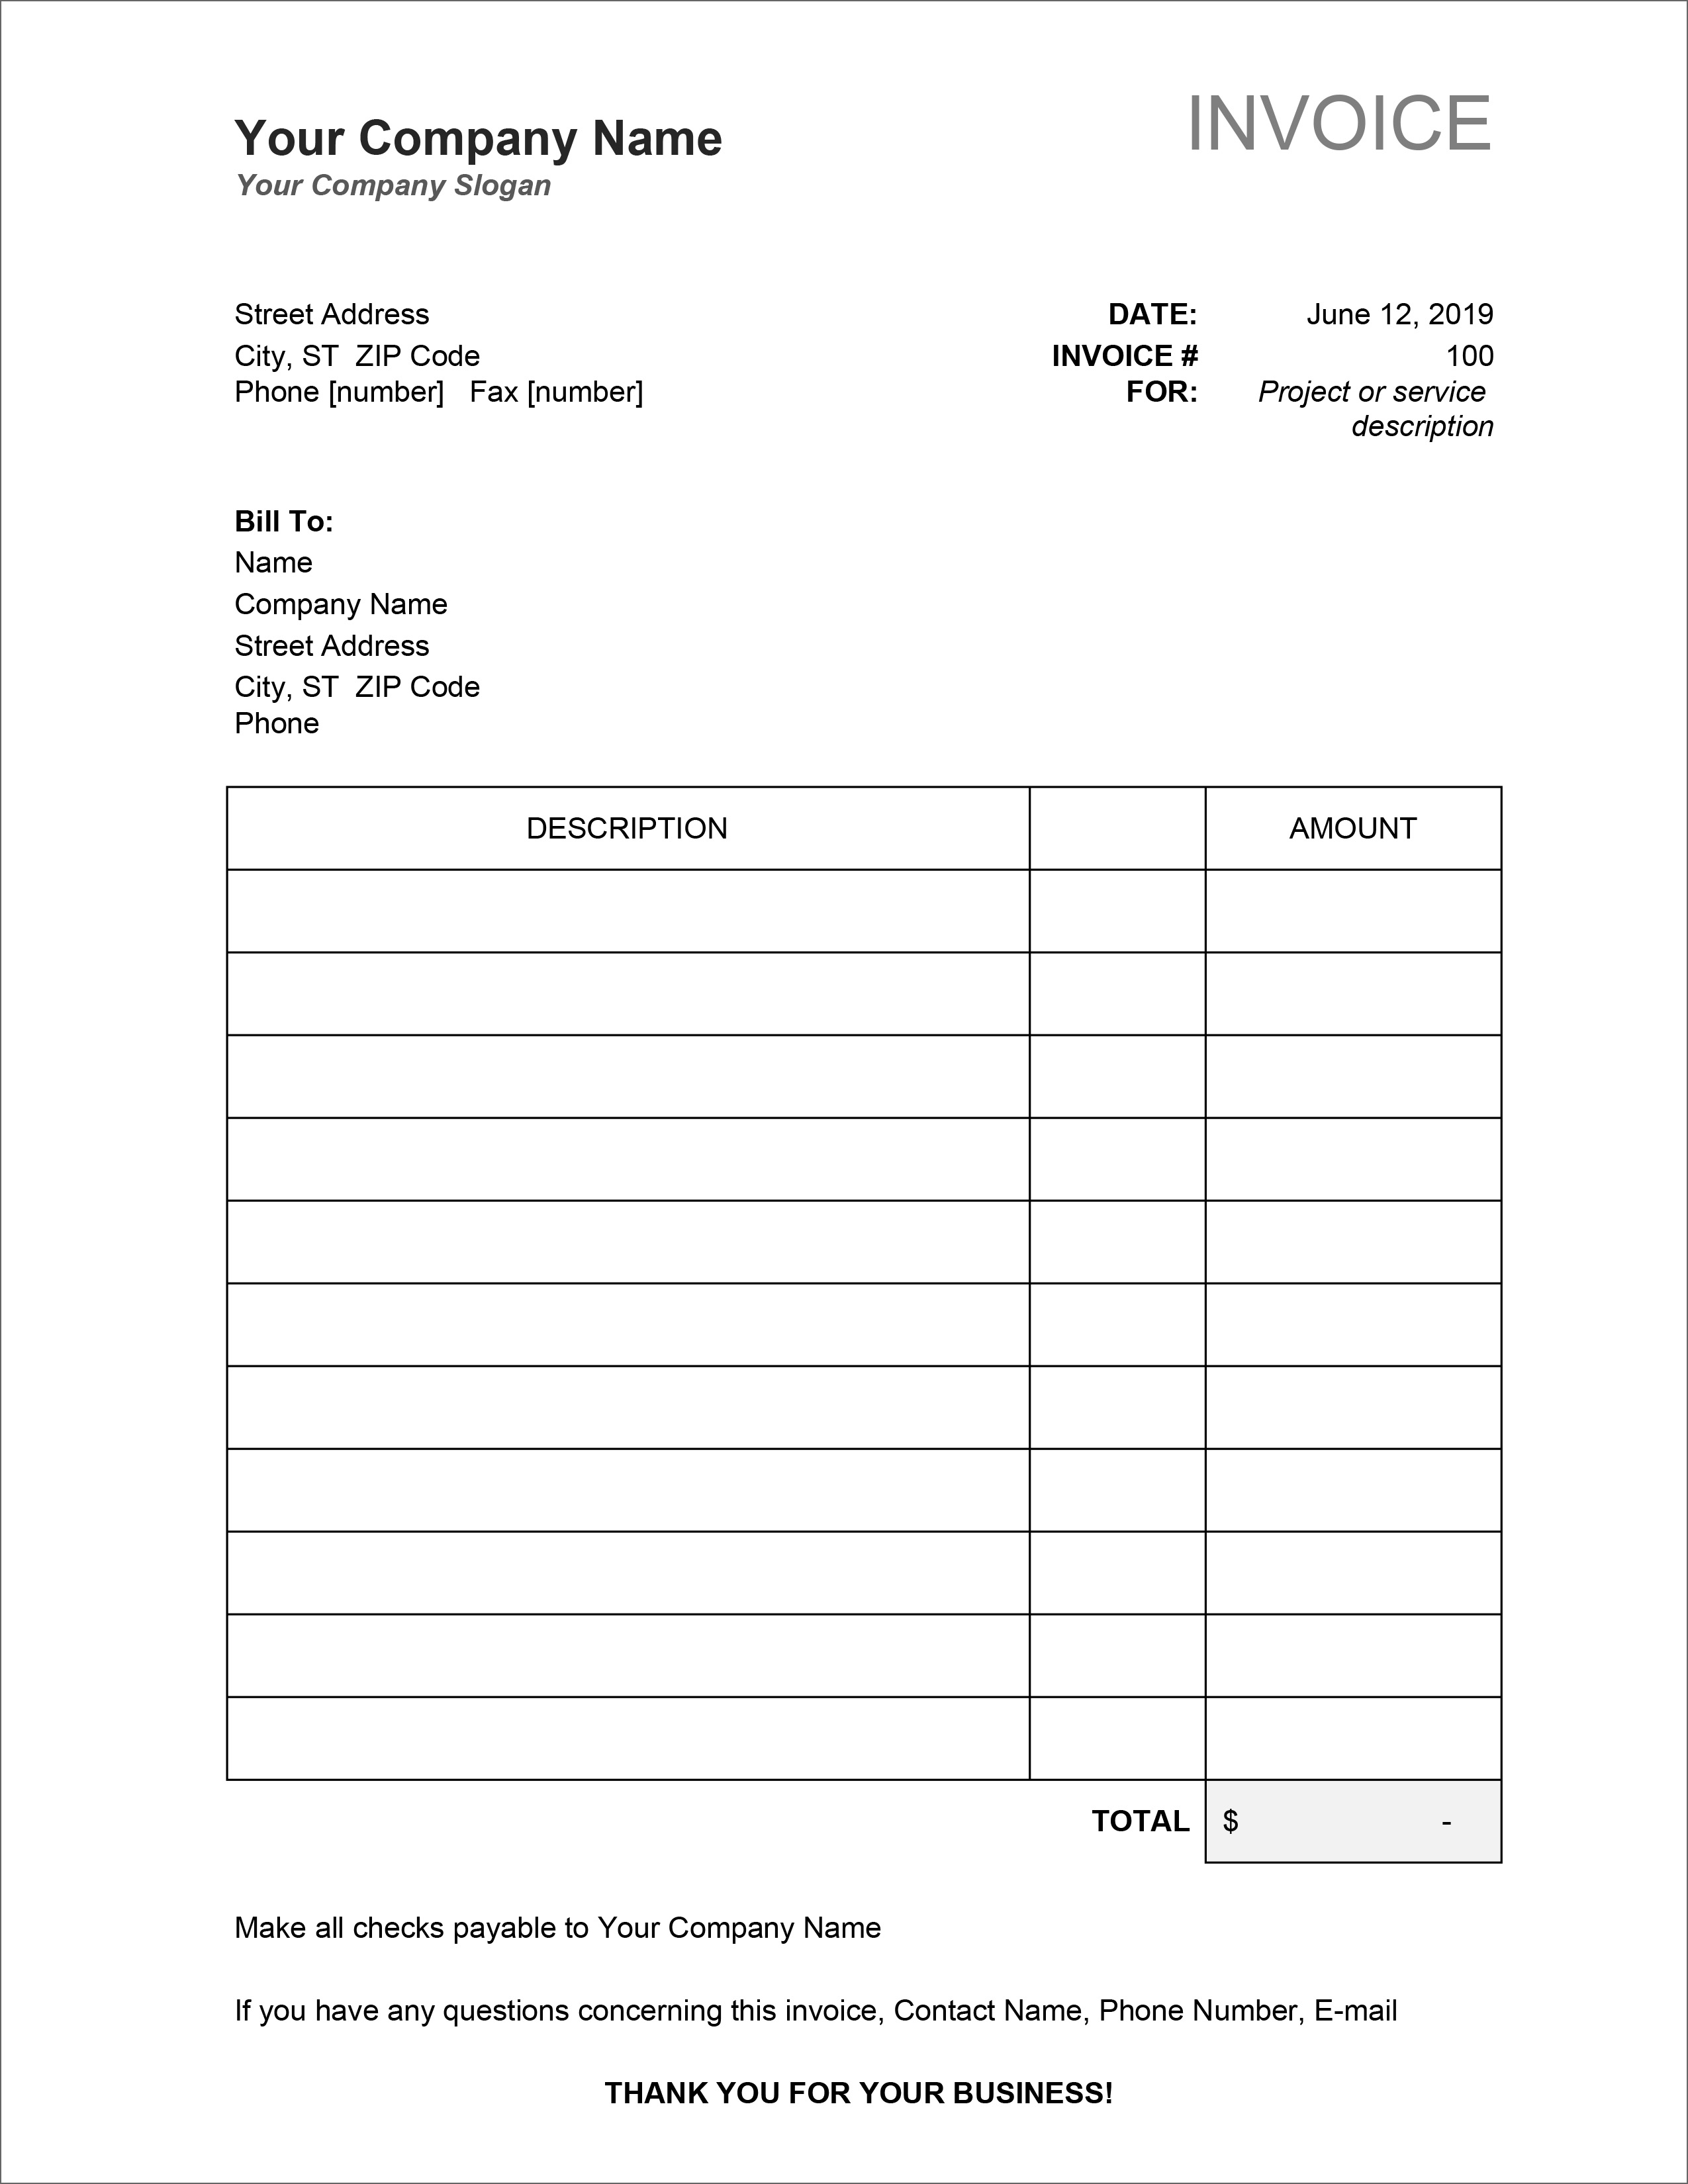 21 Free Invoice Templates In Microsoft Excel And DOCX Formats Intended For Invoice Template Xls Free Download